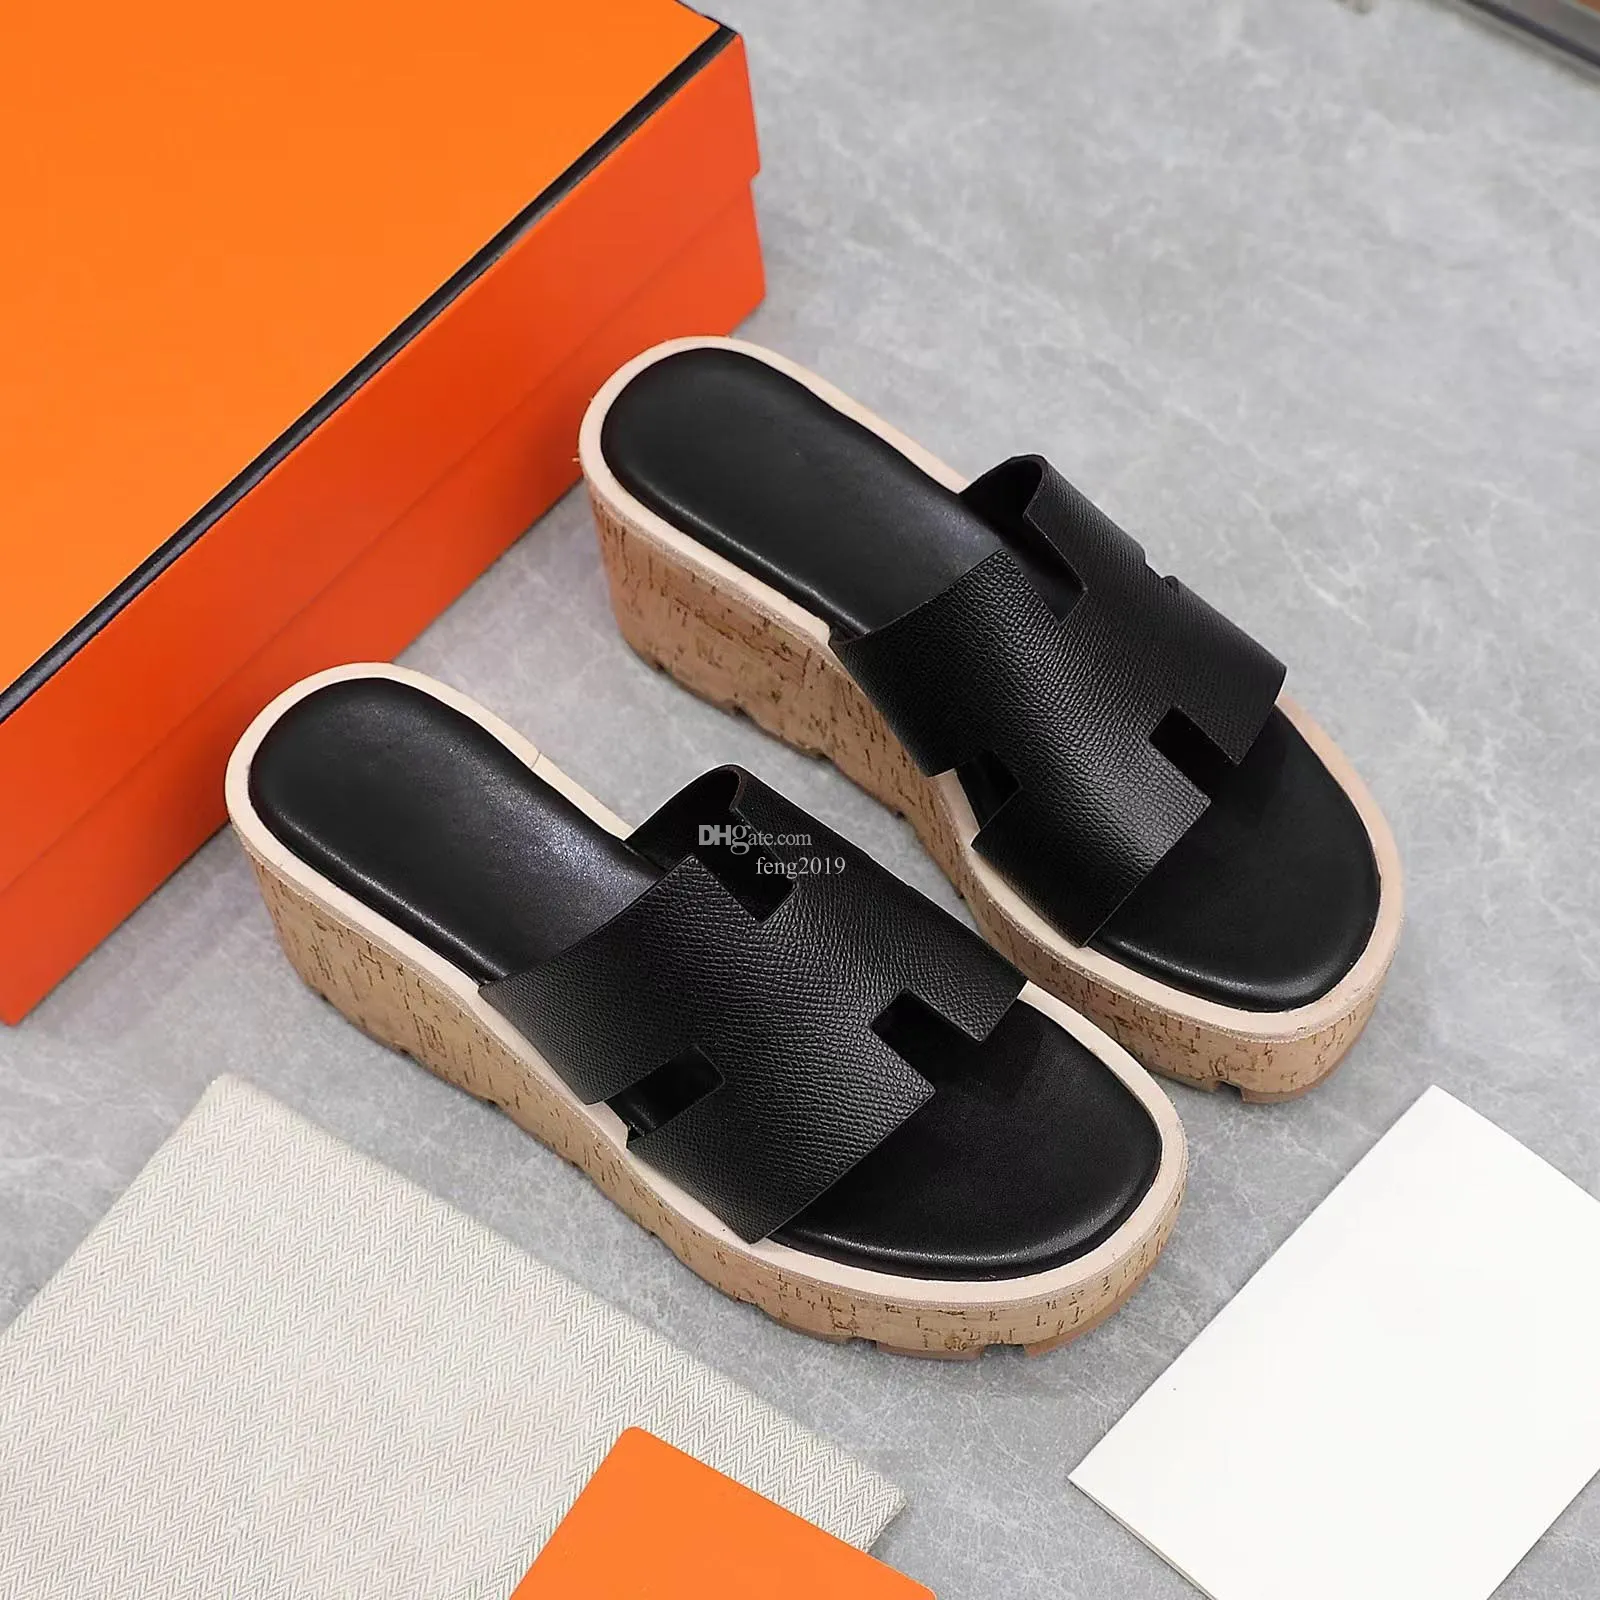 Designer Women Sandals Fashionable Flat Heel White Black H Slippers Rubber Anti slip outsole Summer Simple Versatile Beach Shoes 35-40 with Box